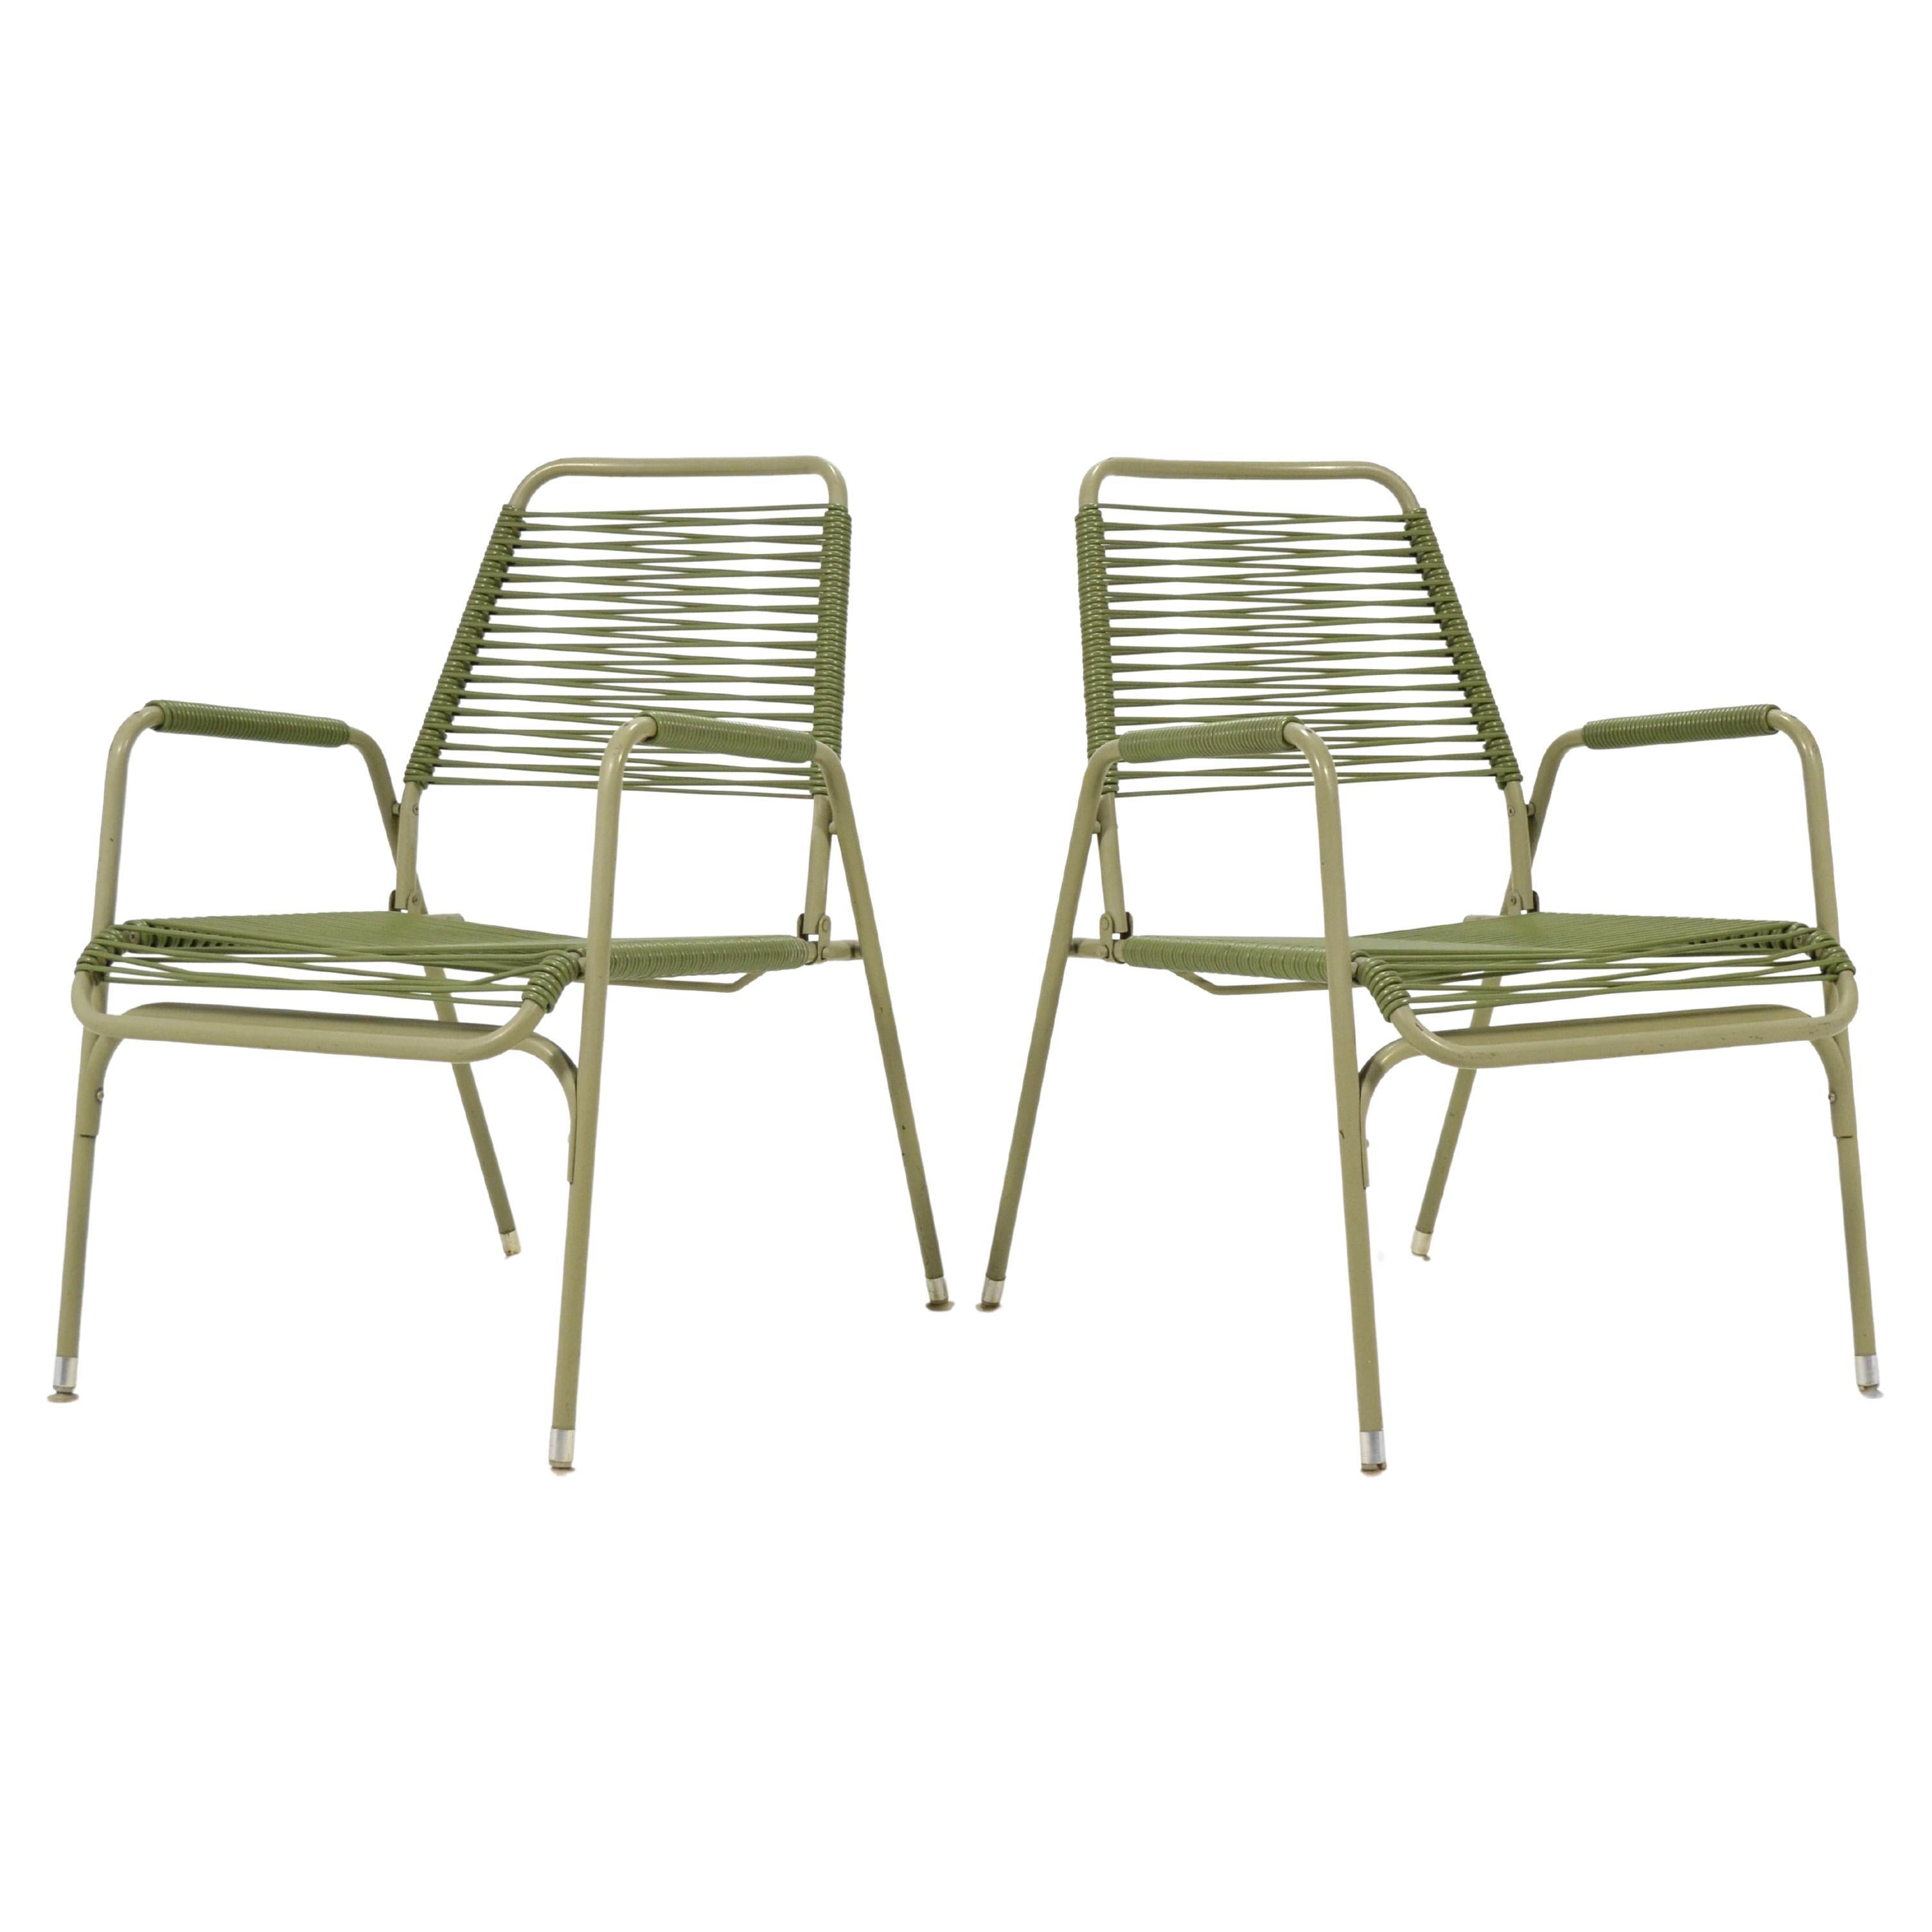 Pair of Surfline Outdoor Chairs